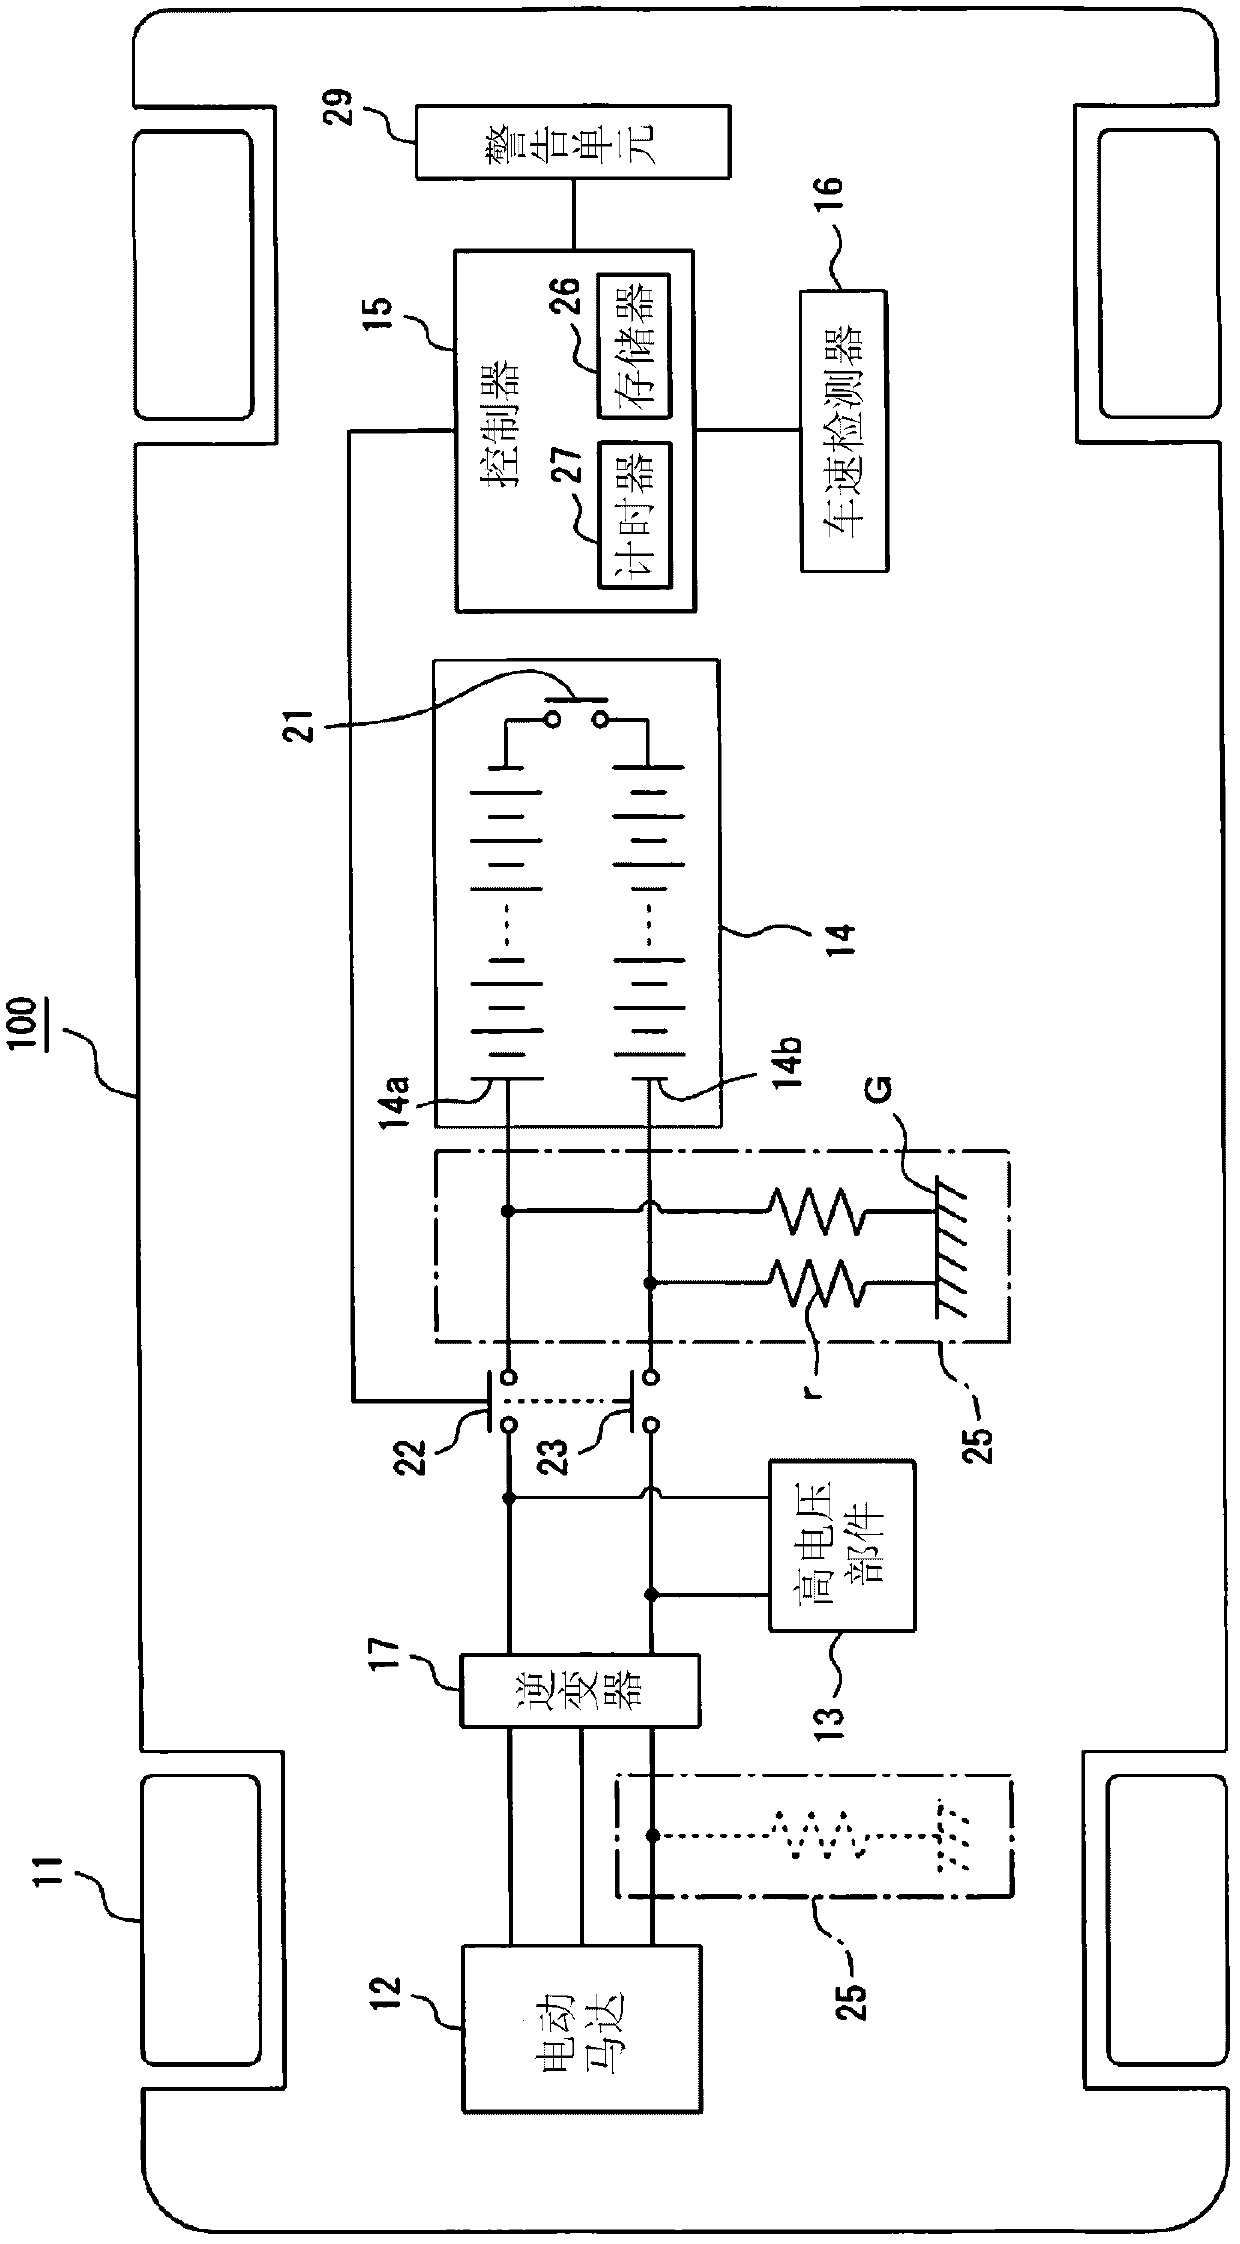 Power supply control apparatus for vehicle